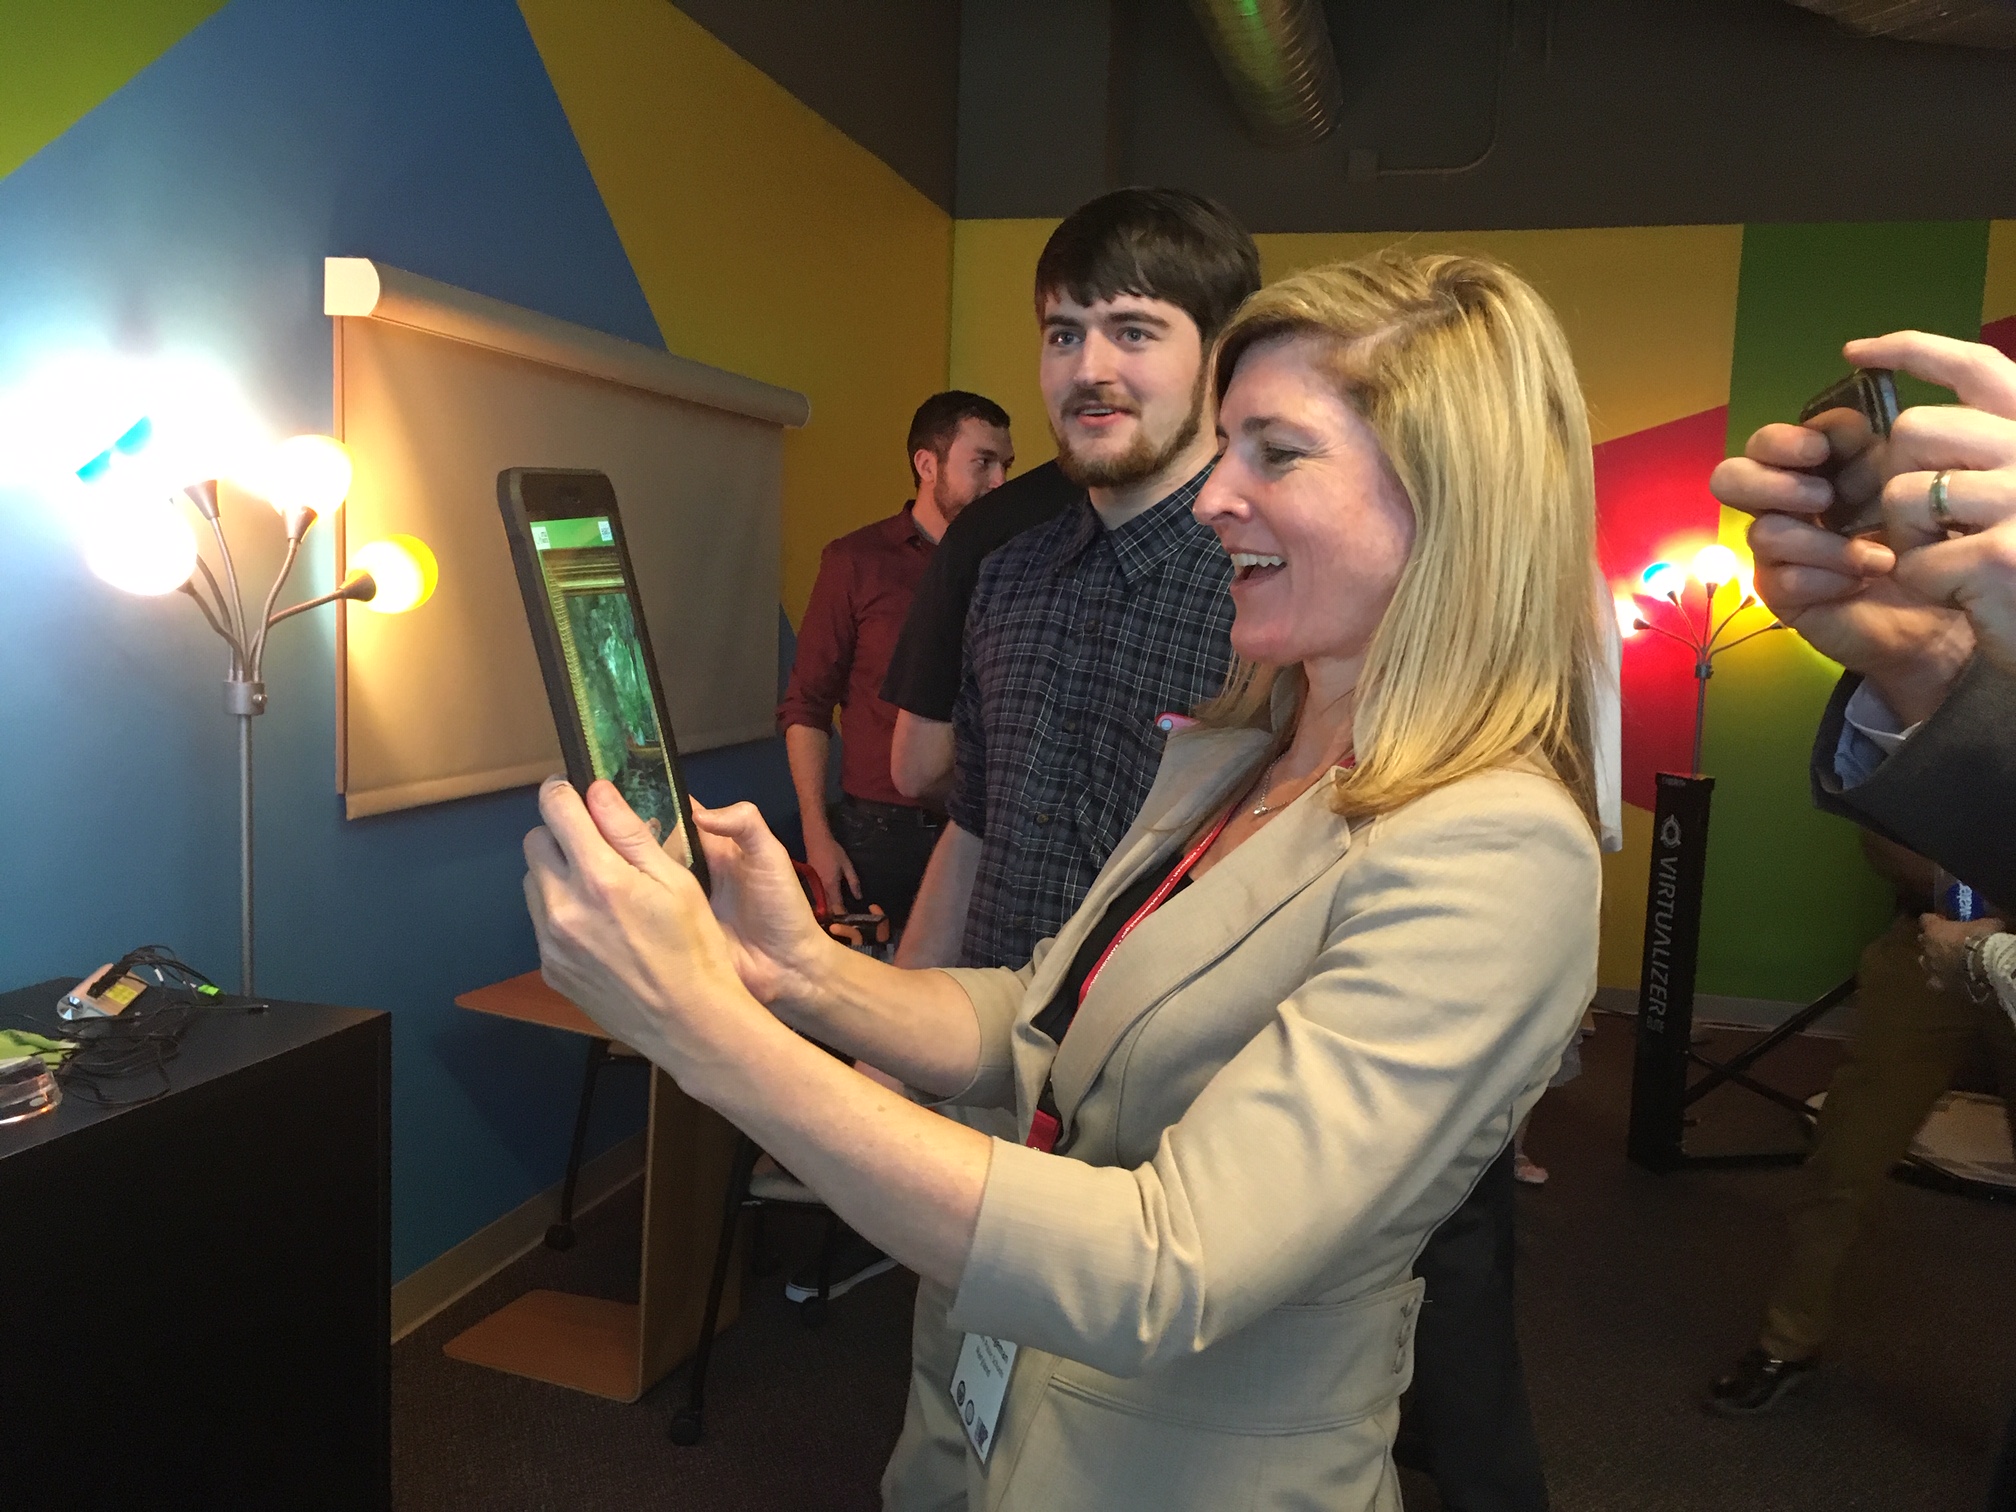 Heather Lageman, a summit participant and executive director of leadership development at Baltimore County Public Schools, uses an educational augmented reality application targeted to art museums.